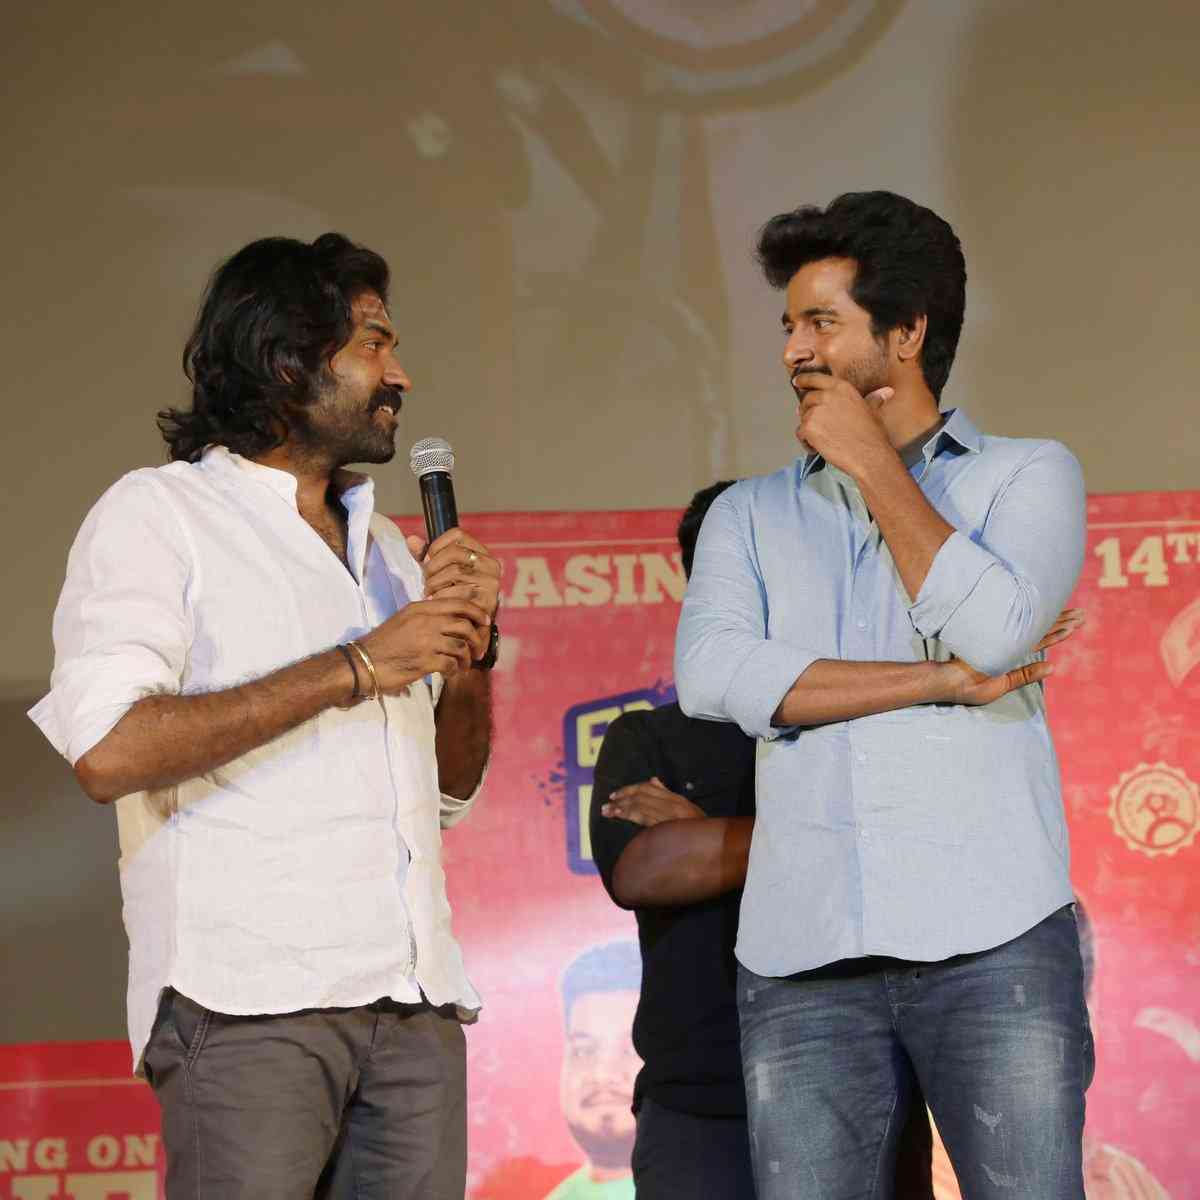 Sivakarthikeyan next Film Firstlook Release Date Revealed Officially